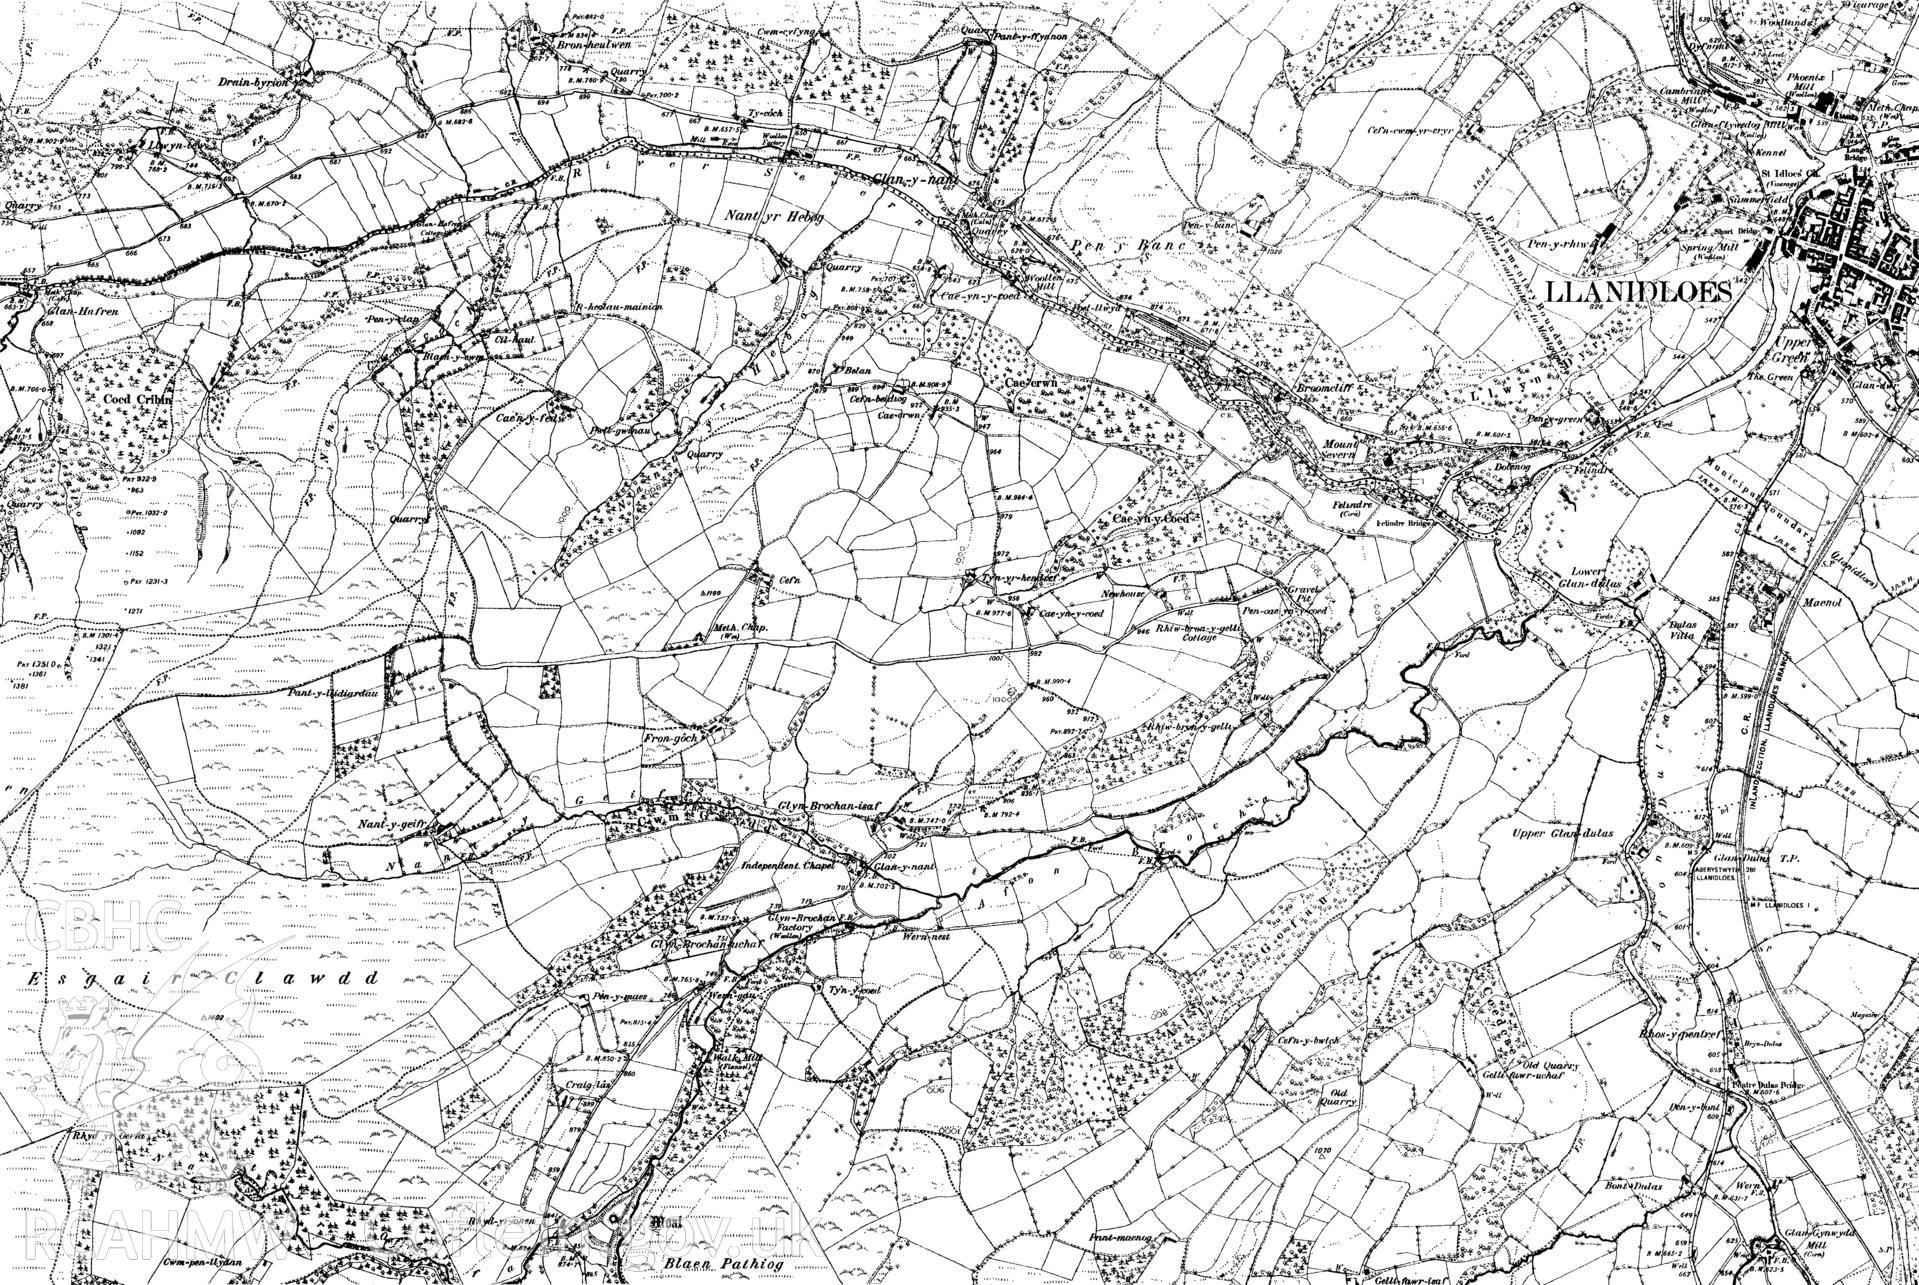 County series first edition map, originally published in 1890. Included in material associated with archaeological building survey of The Old Sawmill, Llanidloes, Powys, conducted by Archaeology Wales, 2018. Project no. 2583. Report no. 1645.